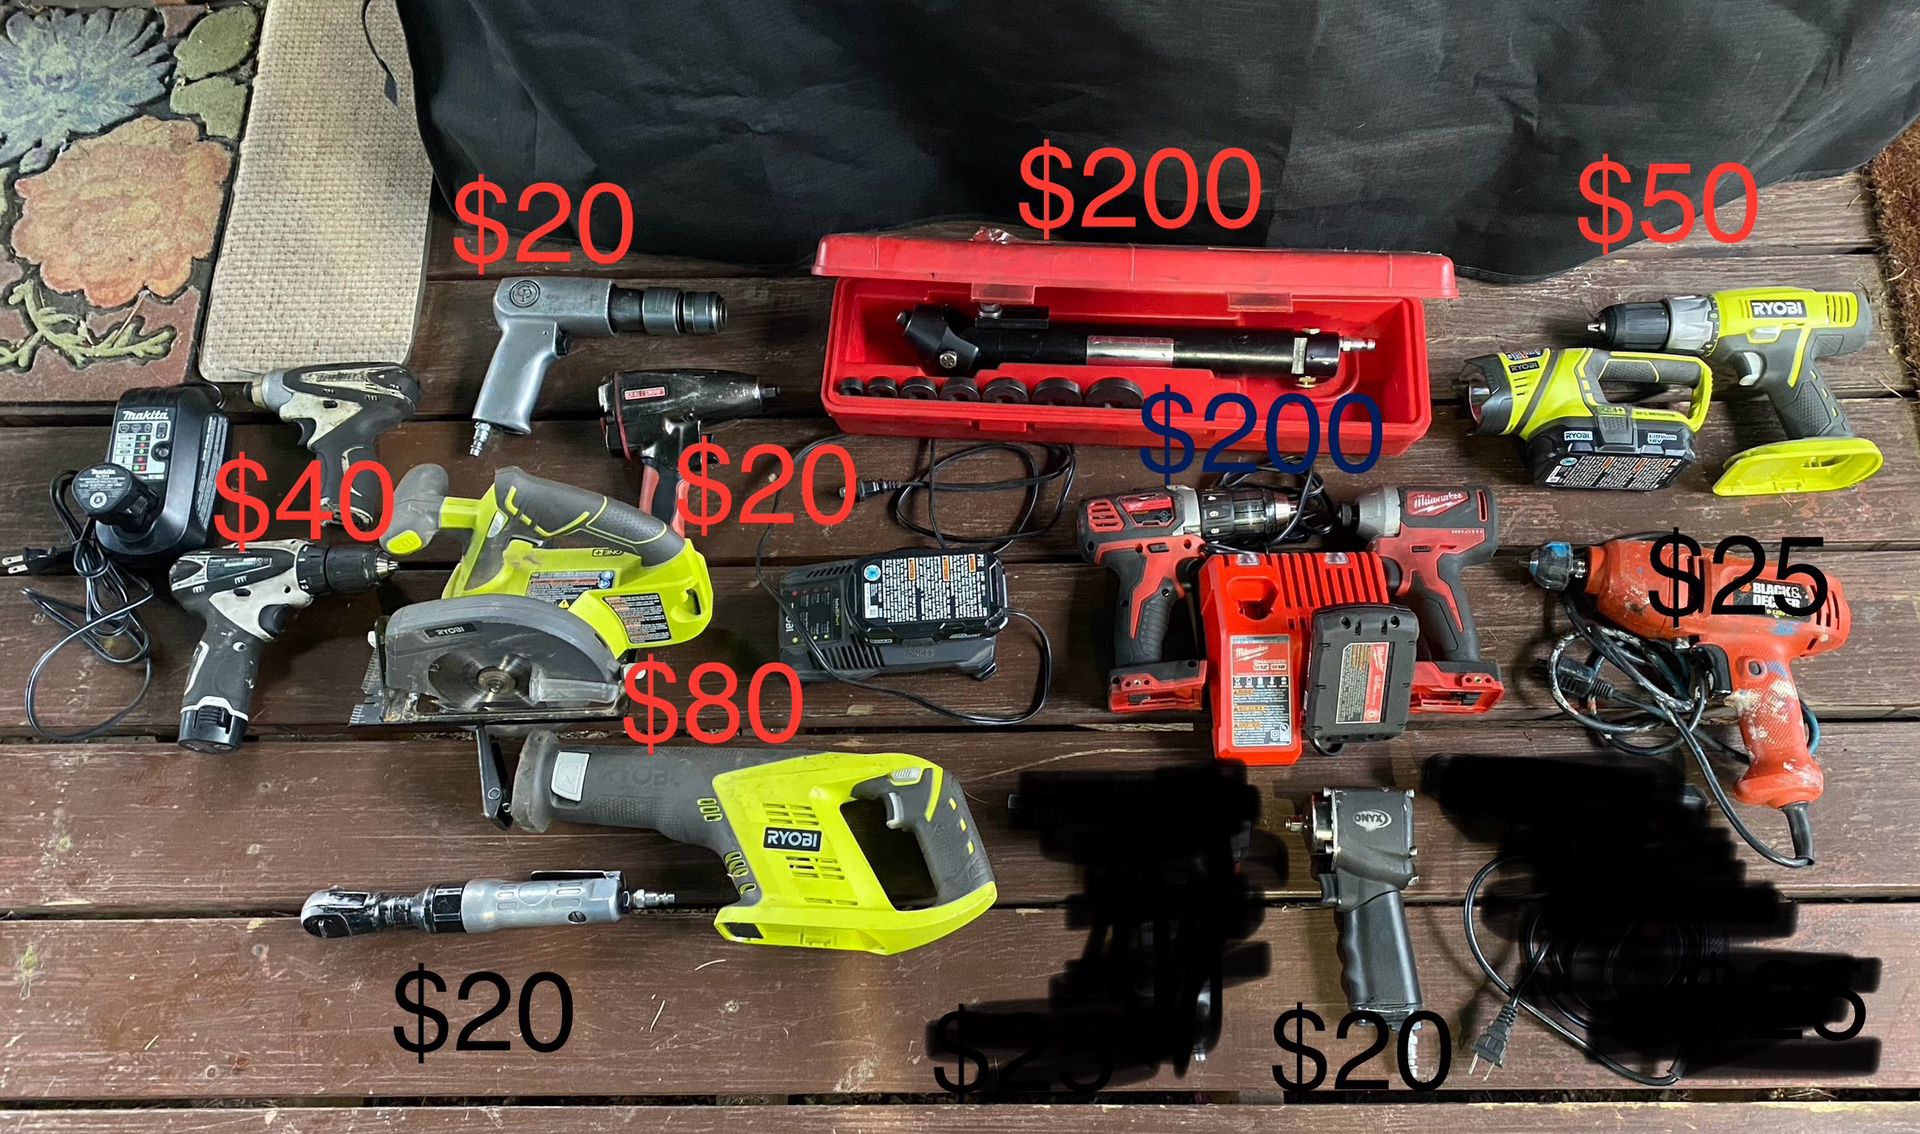 Tools For Sale Pickup With Cash